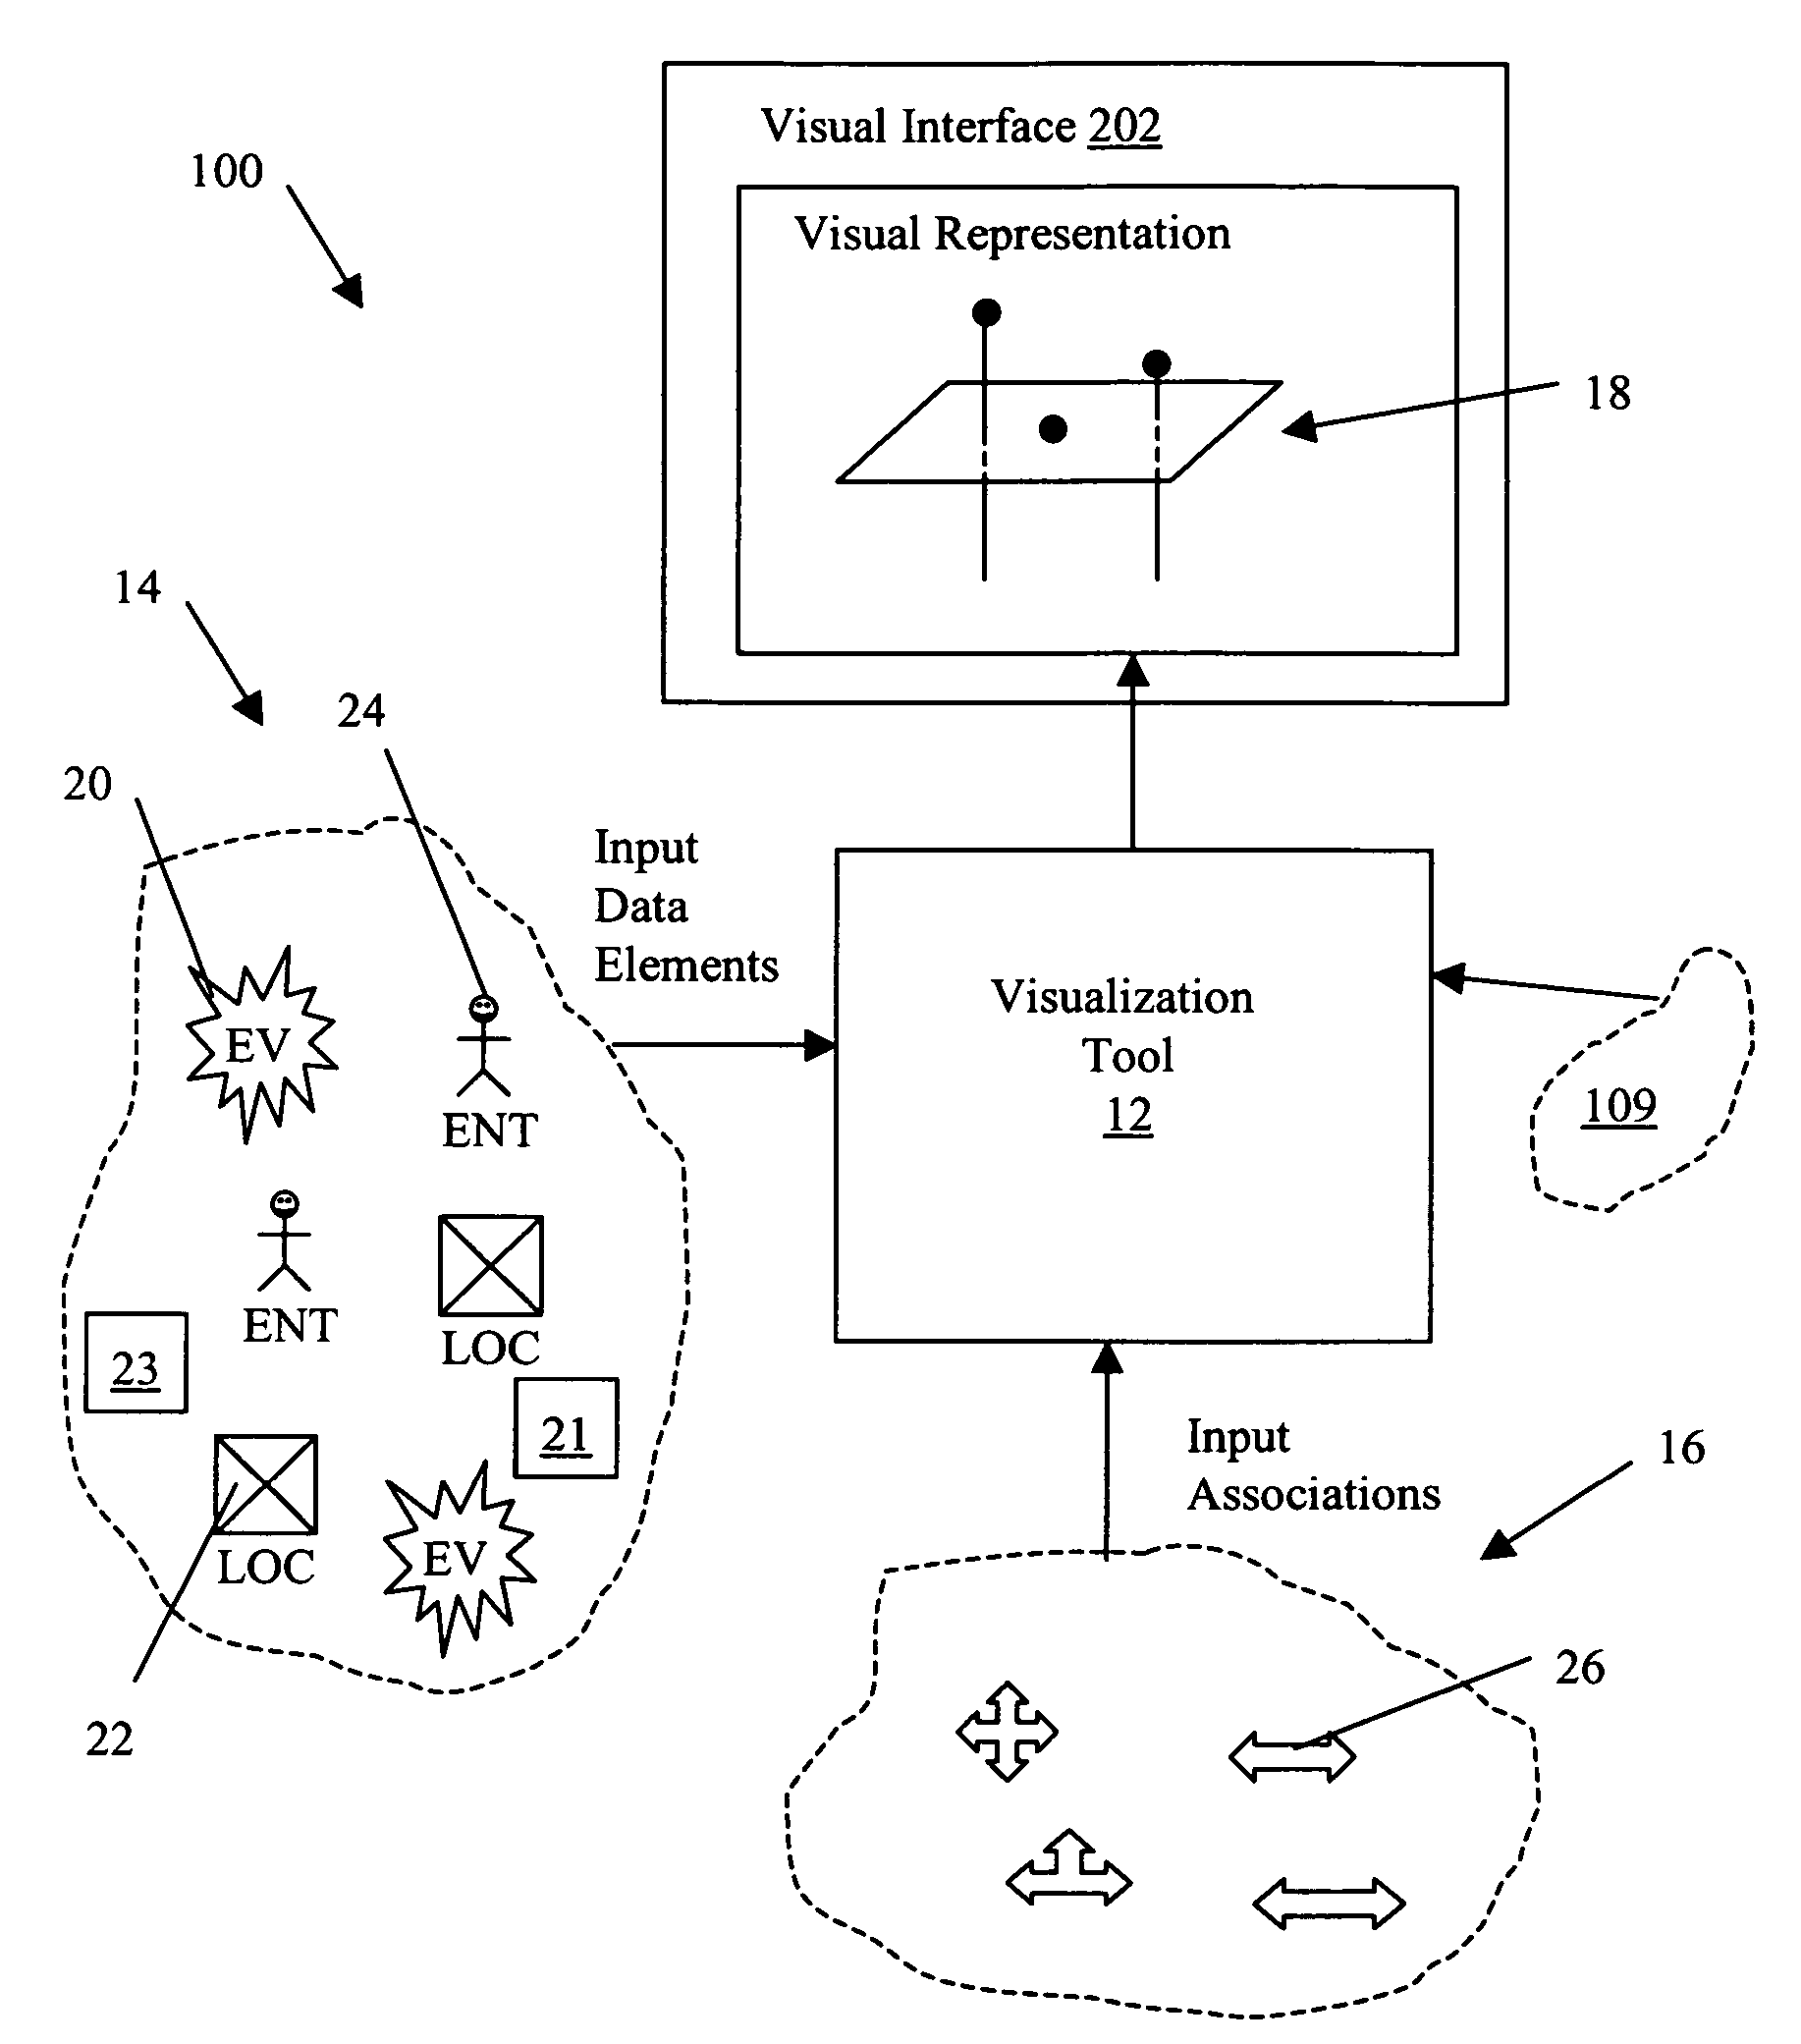 System and method for applying link analysis tools for visualizing connected temporal and spatial information on a user inferface